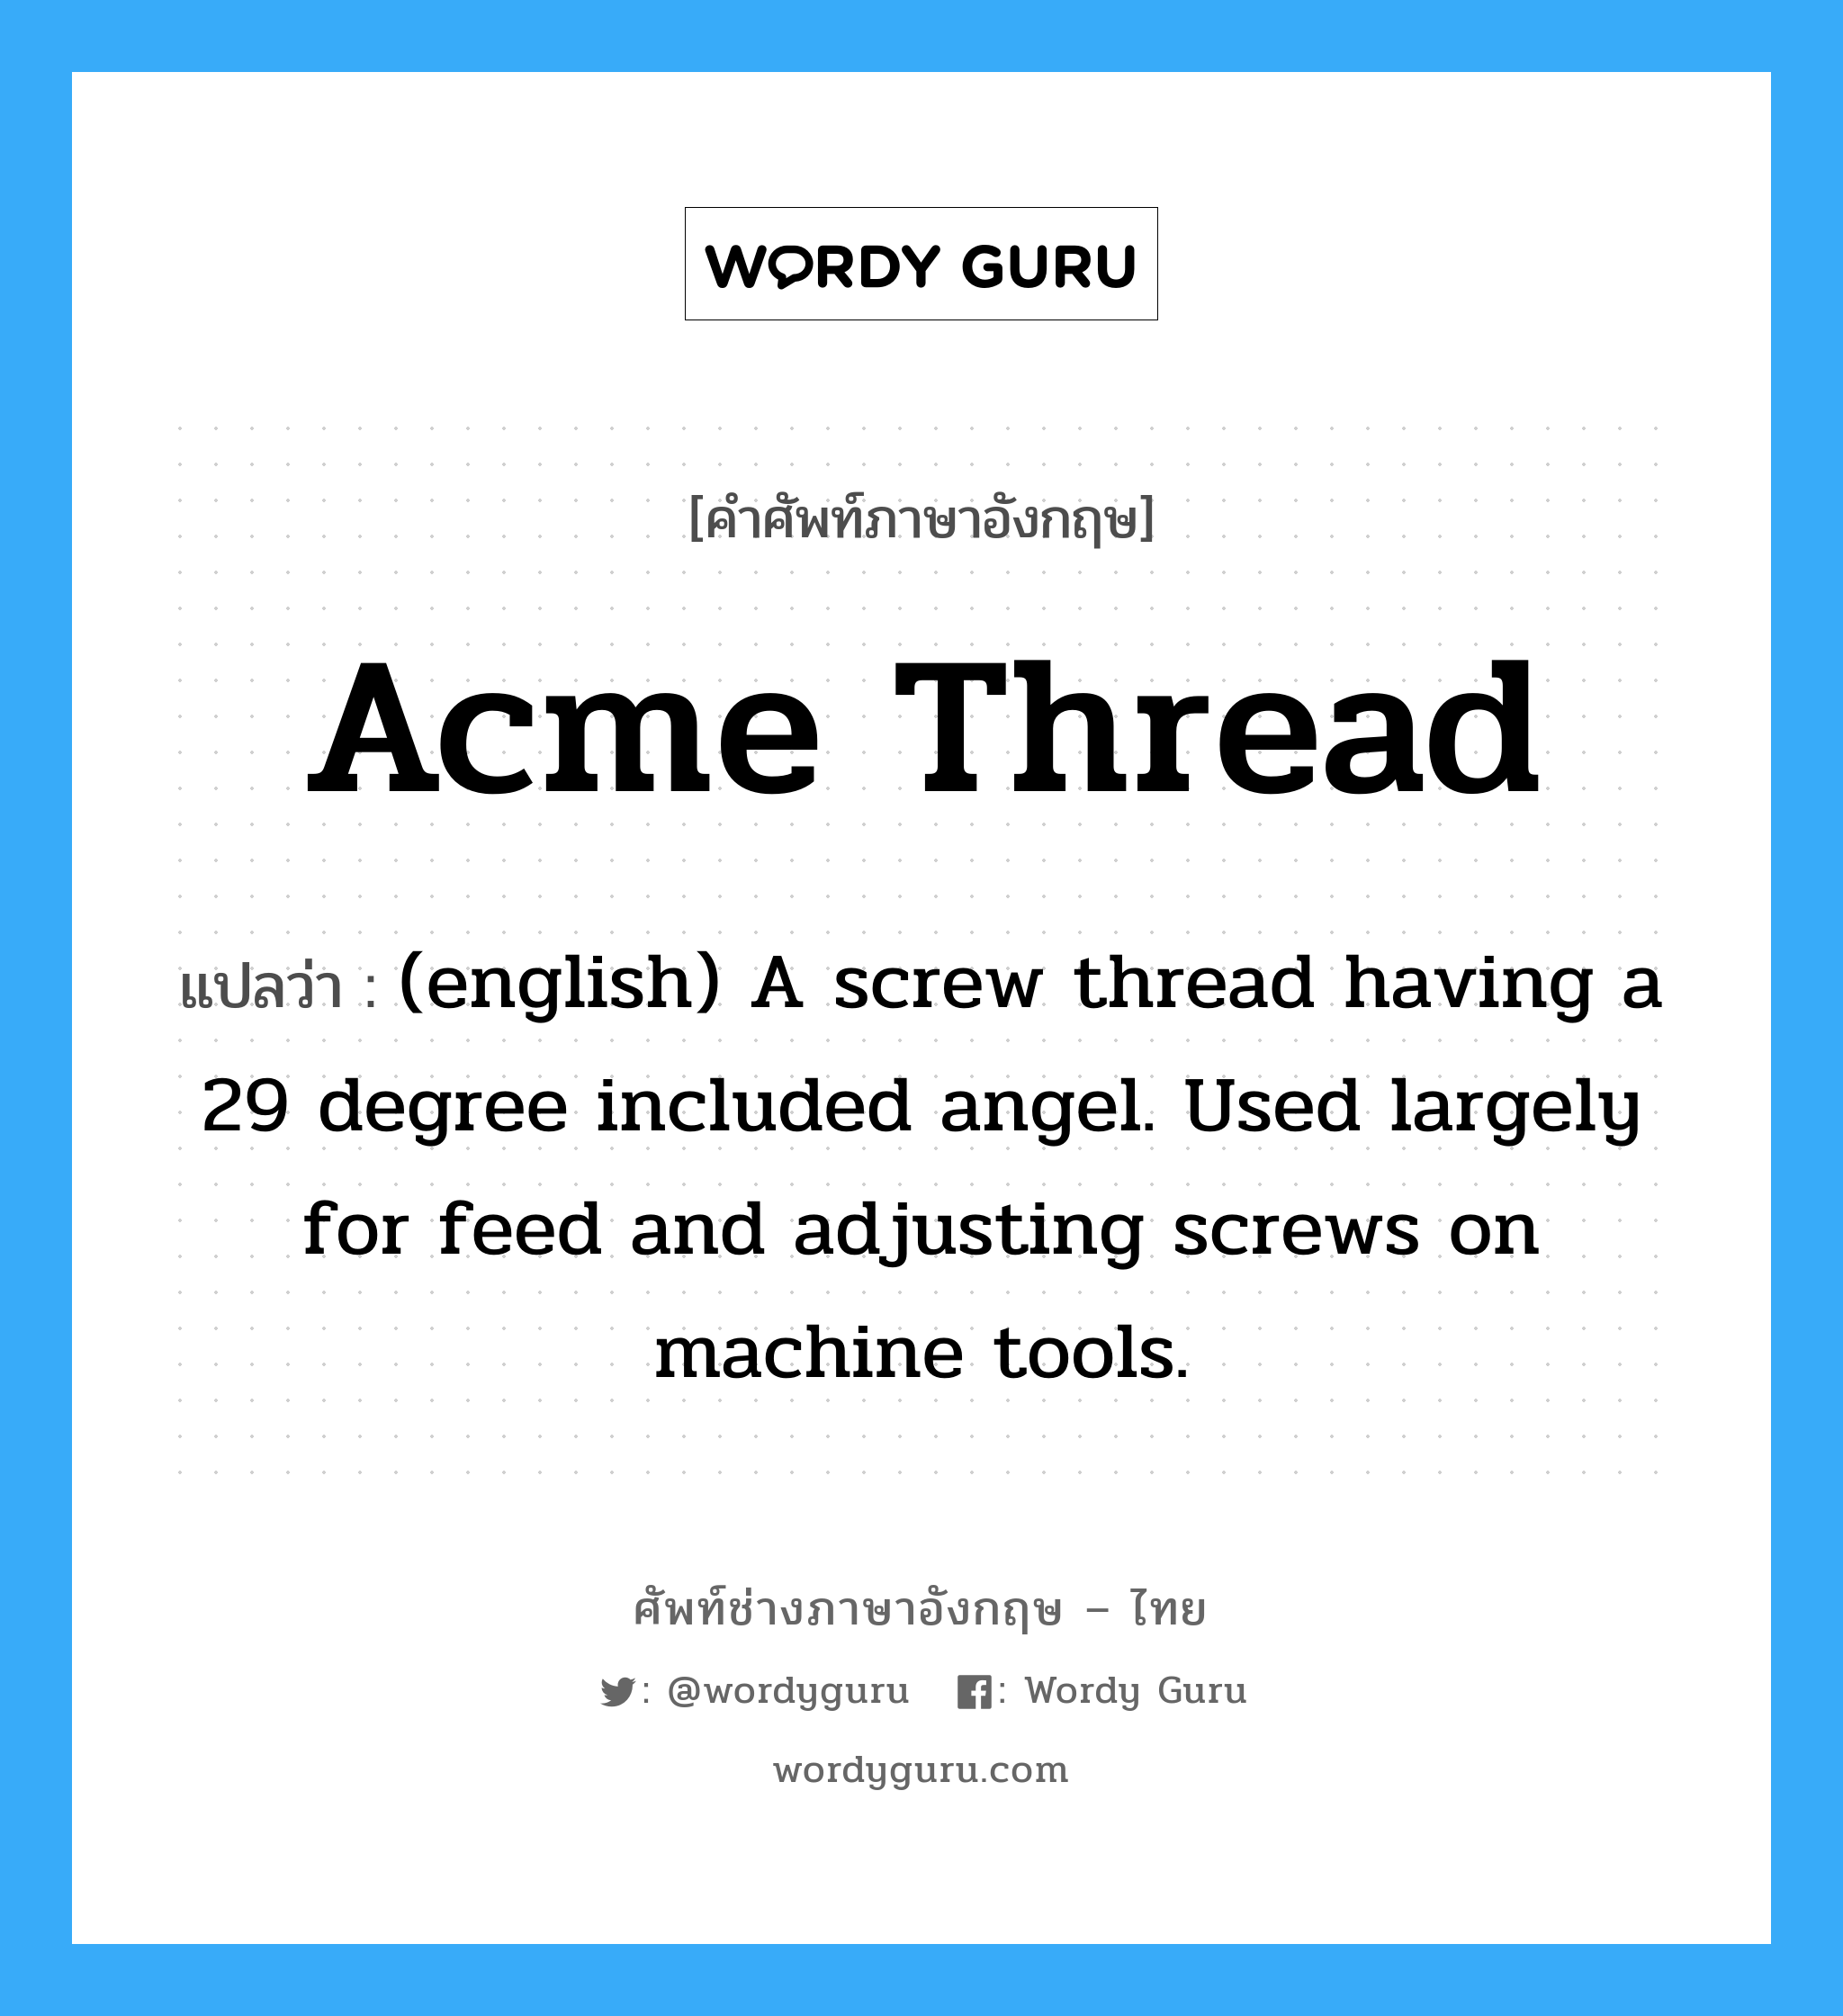 Acme Thread แปลว่า?, คำศัพท์ช่างภาษาอังกฤษ - ไทย Acme Thread คำศัพท์ภาษาอังกฤษ Acme Thread แปลว่า (english) A screw thread having a 29 degree included angel. Used largely for feed and adjusting screws on machine tools.